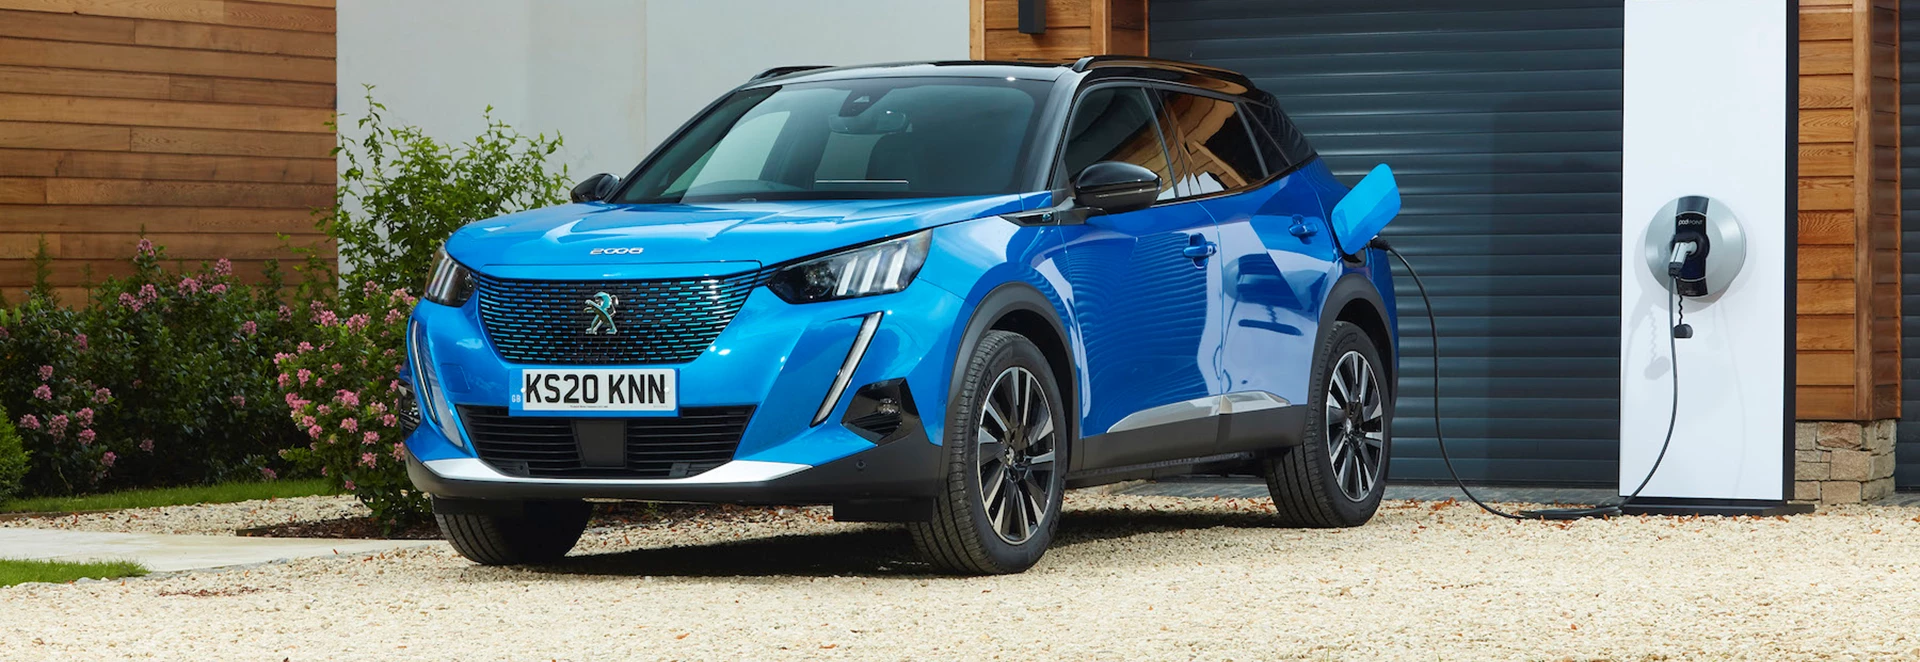 Peugeot electrified range: Here’s what’s available 